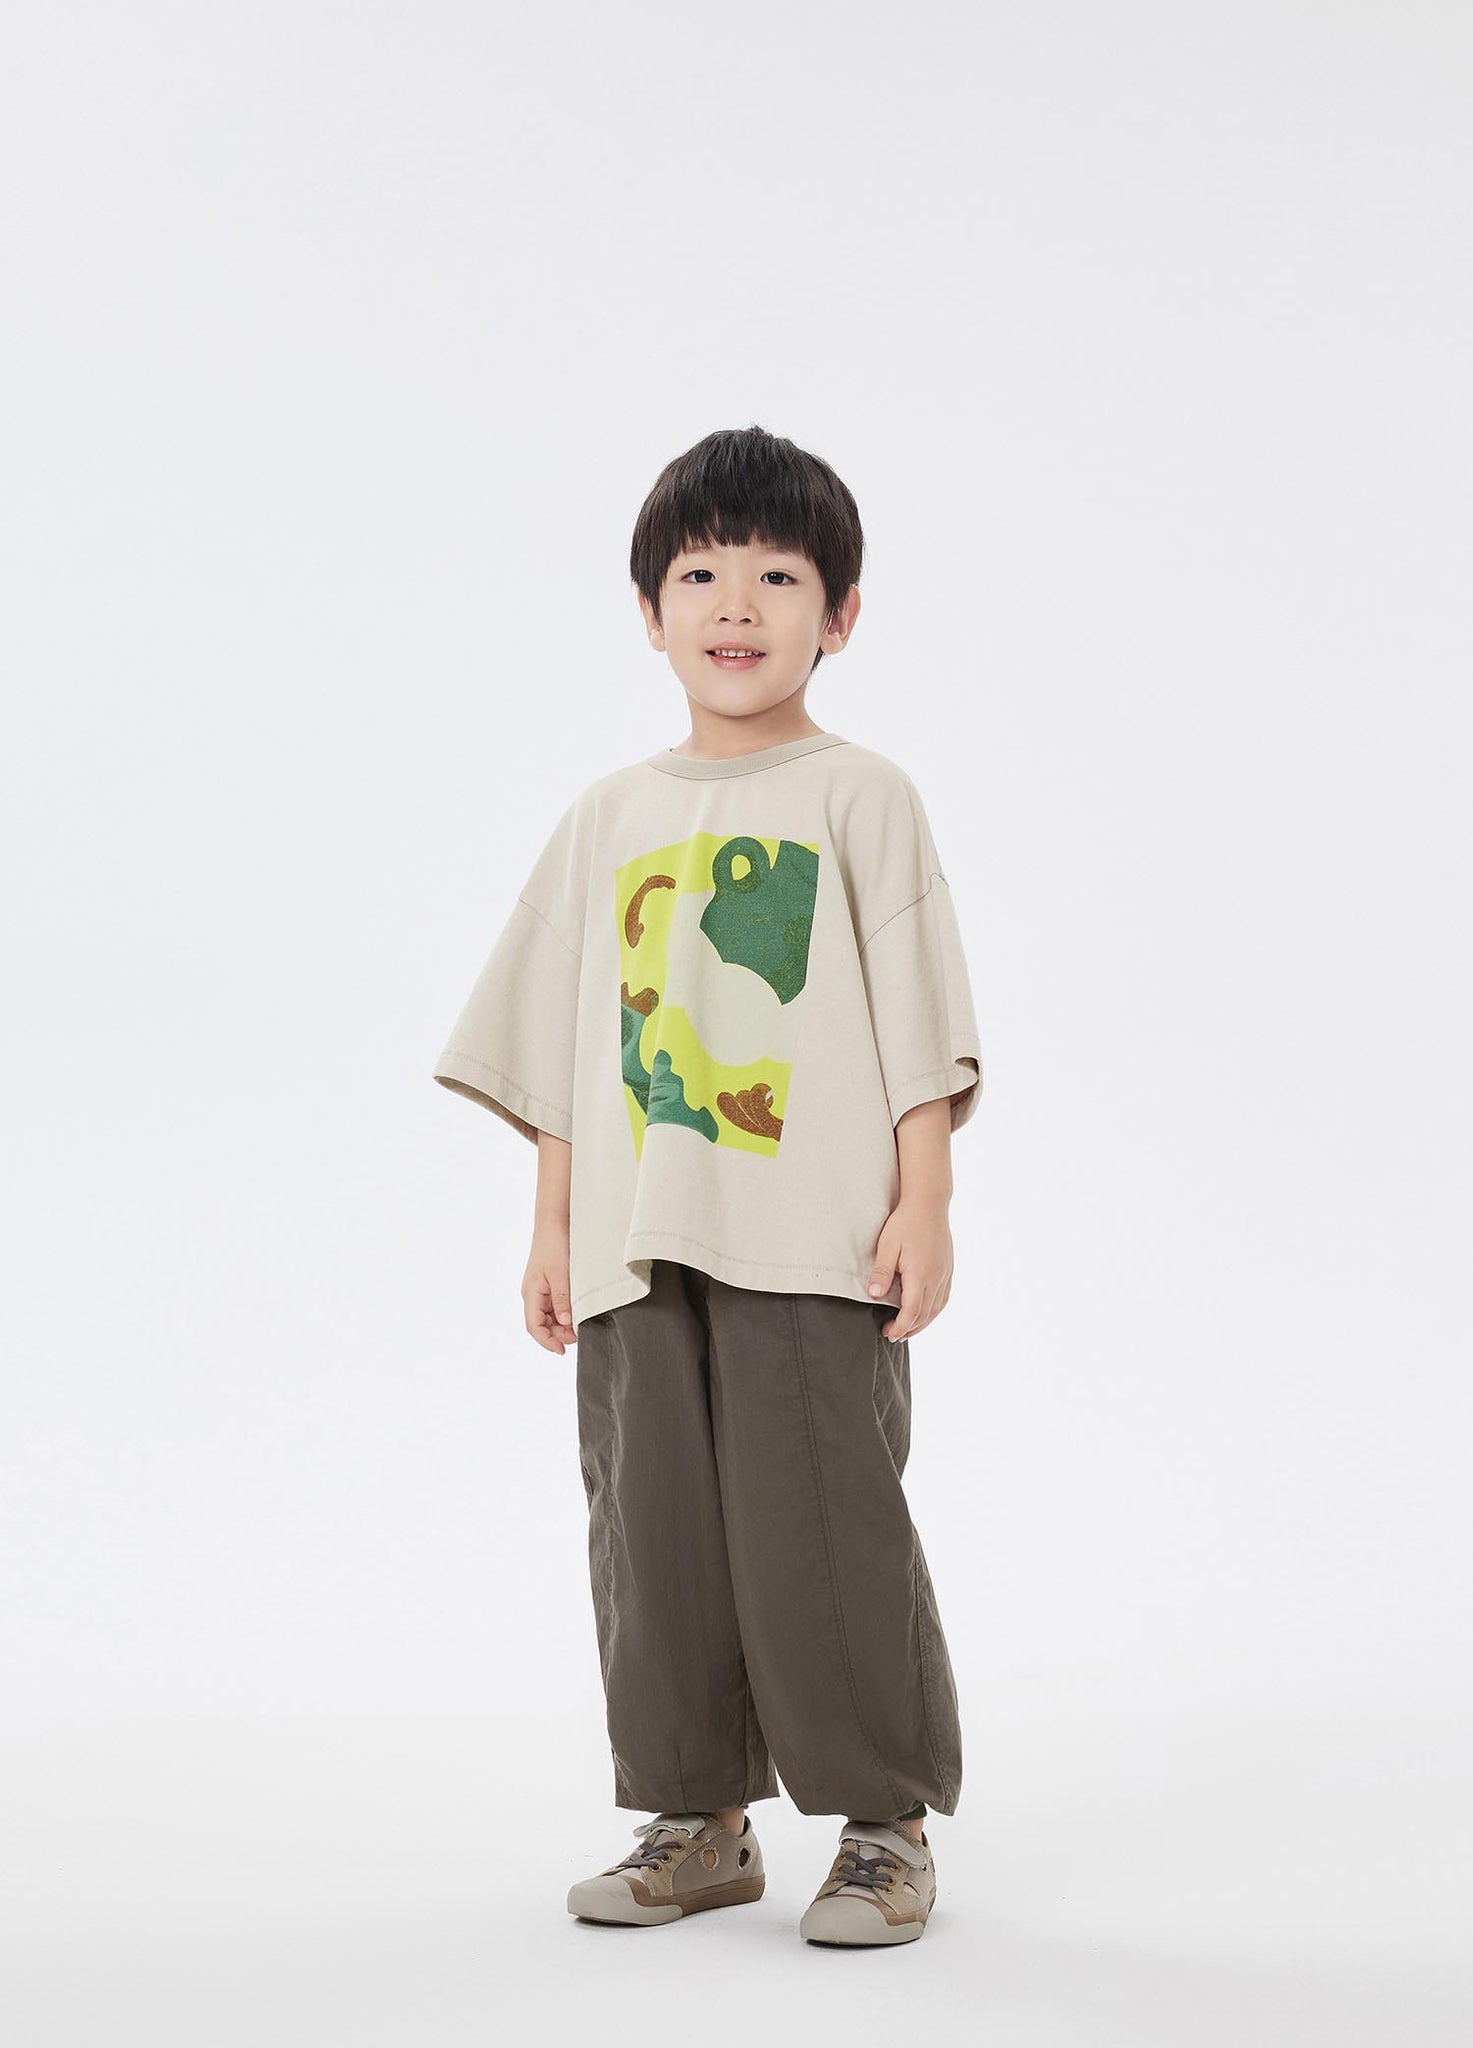 Pants / jnby by JNBY Loose Fit Linen Blended Pants